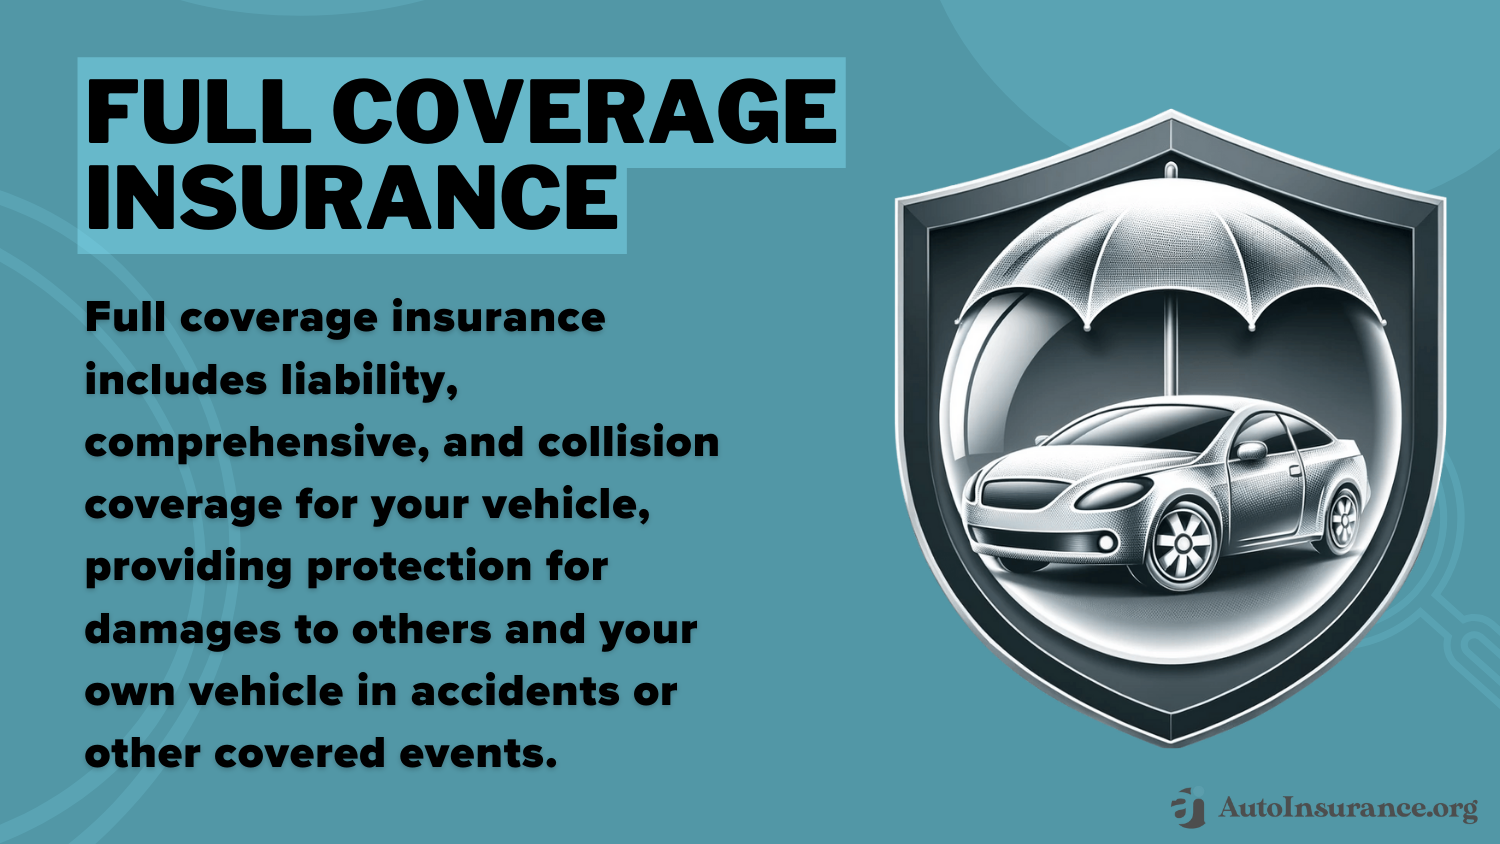 Does my auto insurance cover rental cars?: Full Coverage Auto Insurance